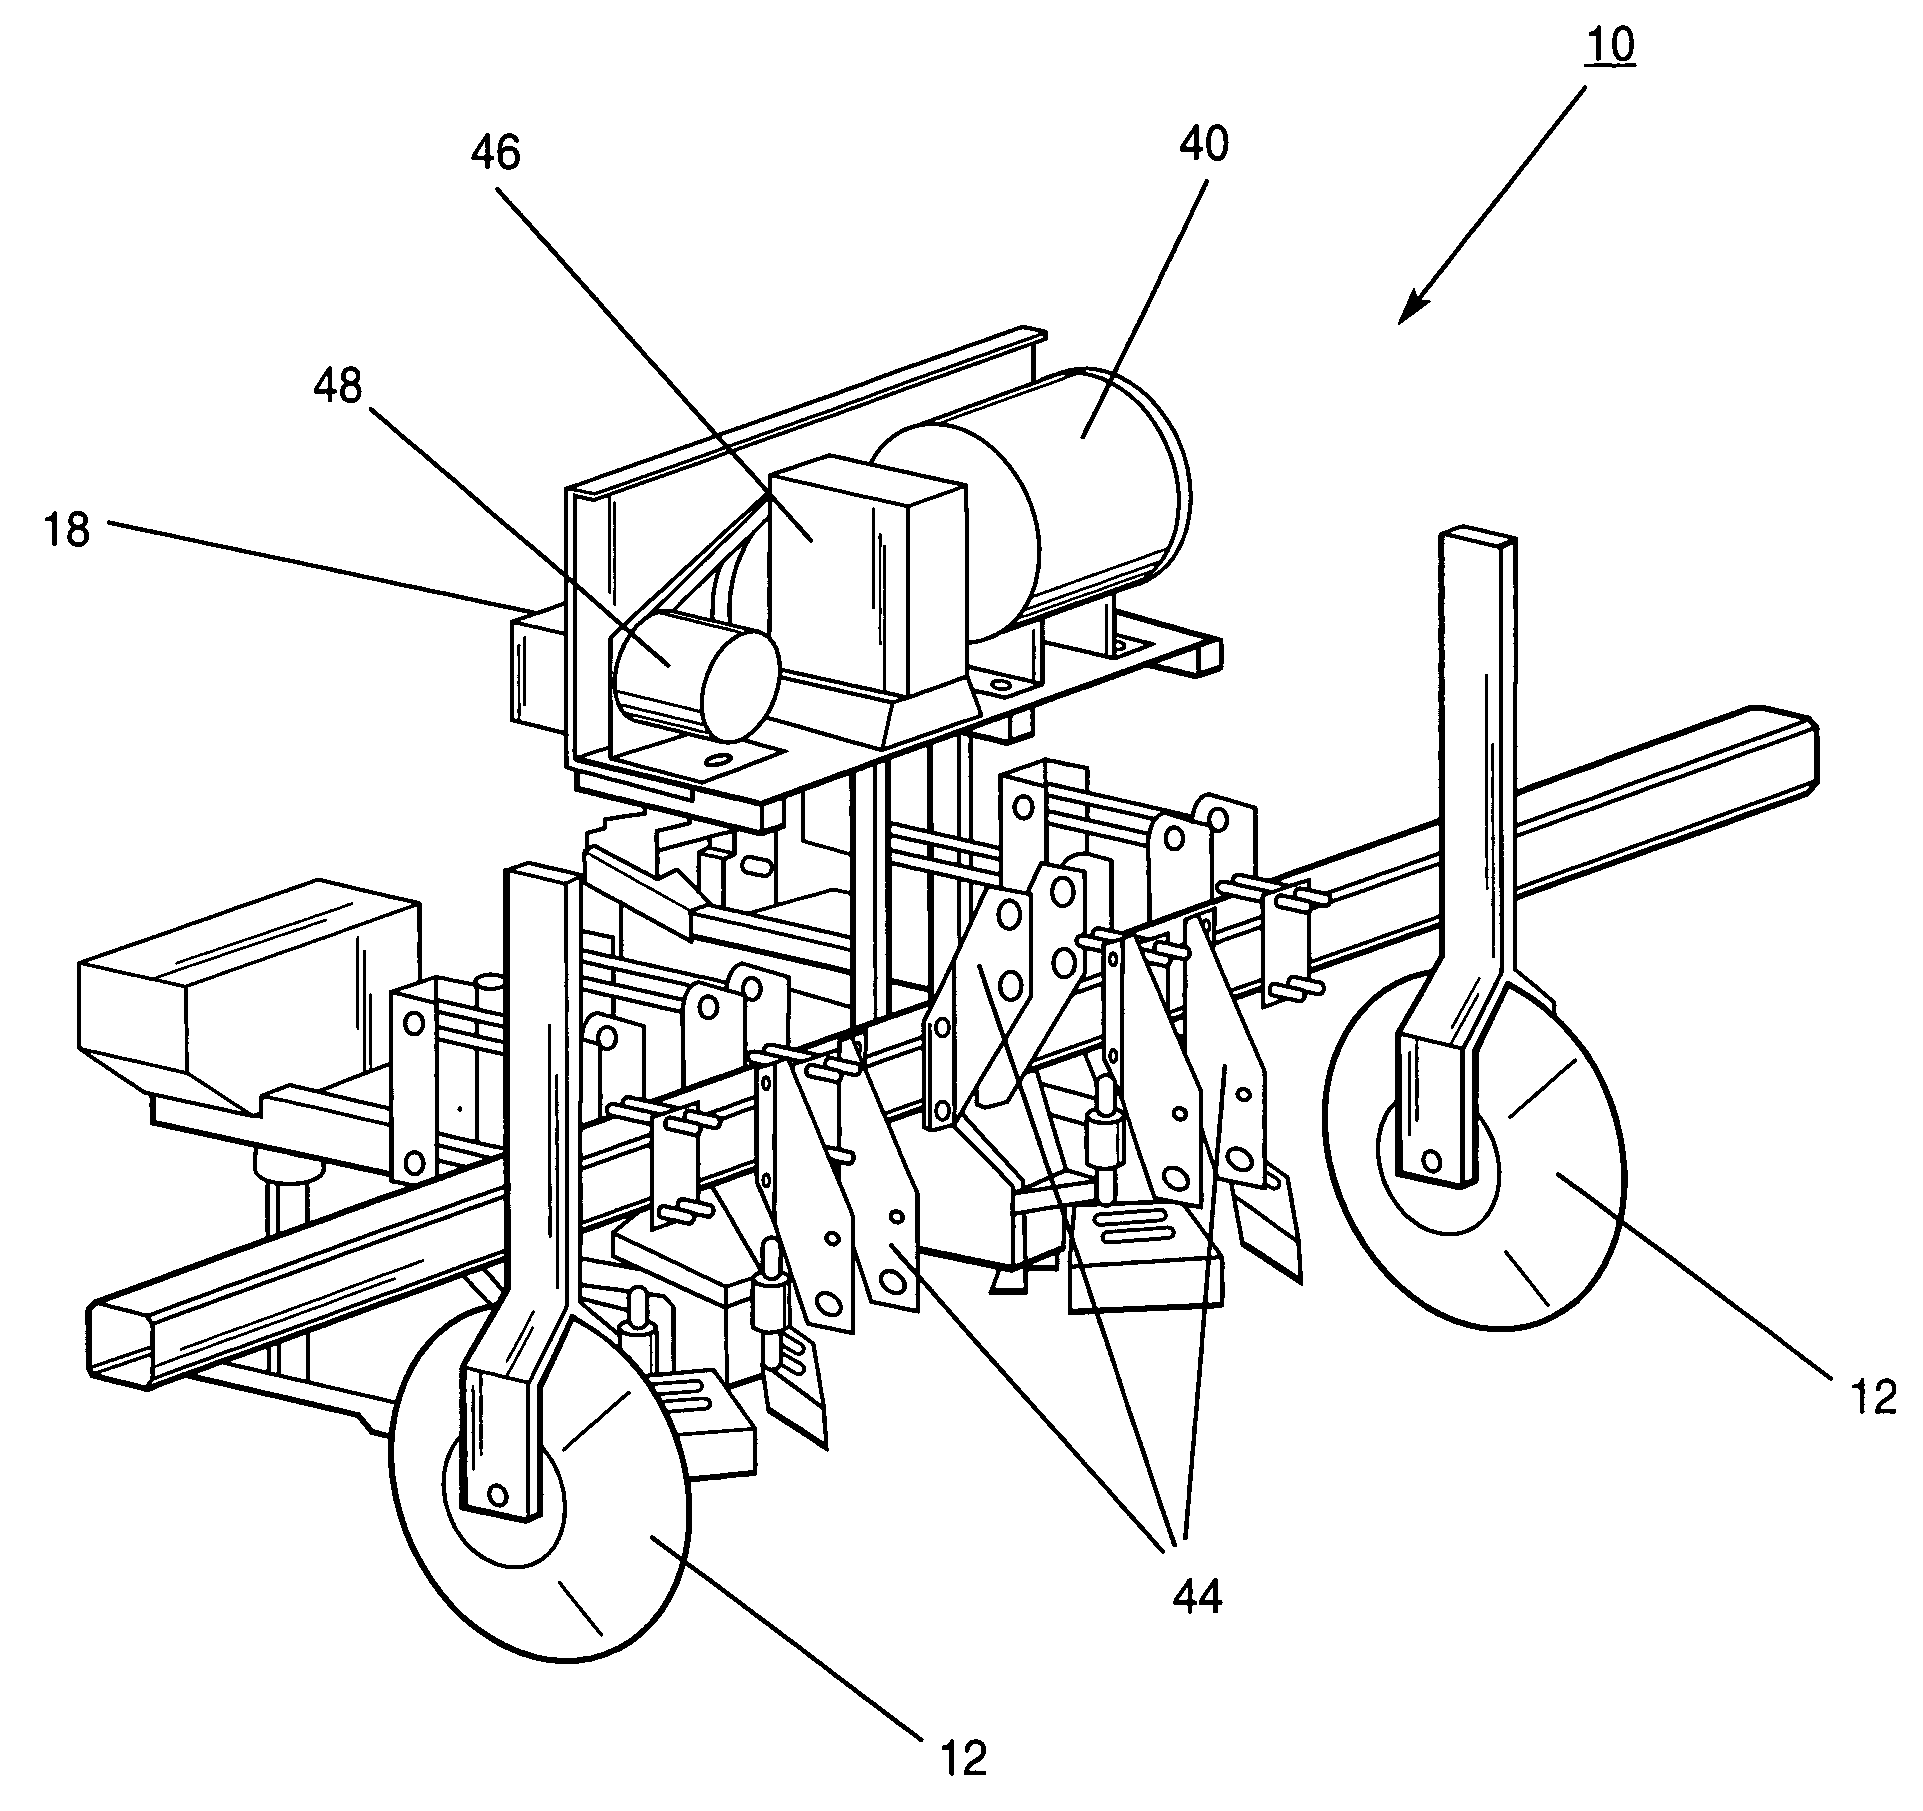 Crop thinning apparatus and method